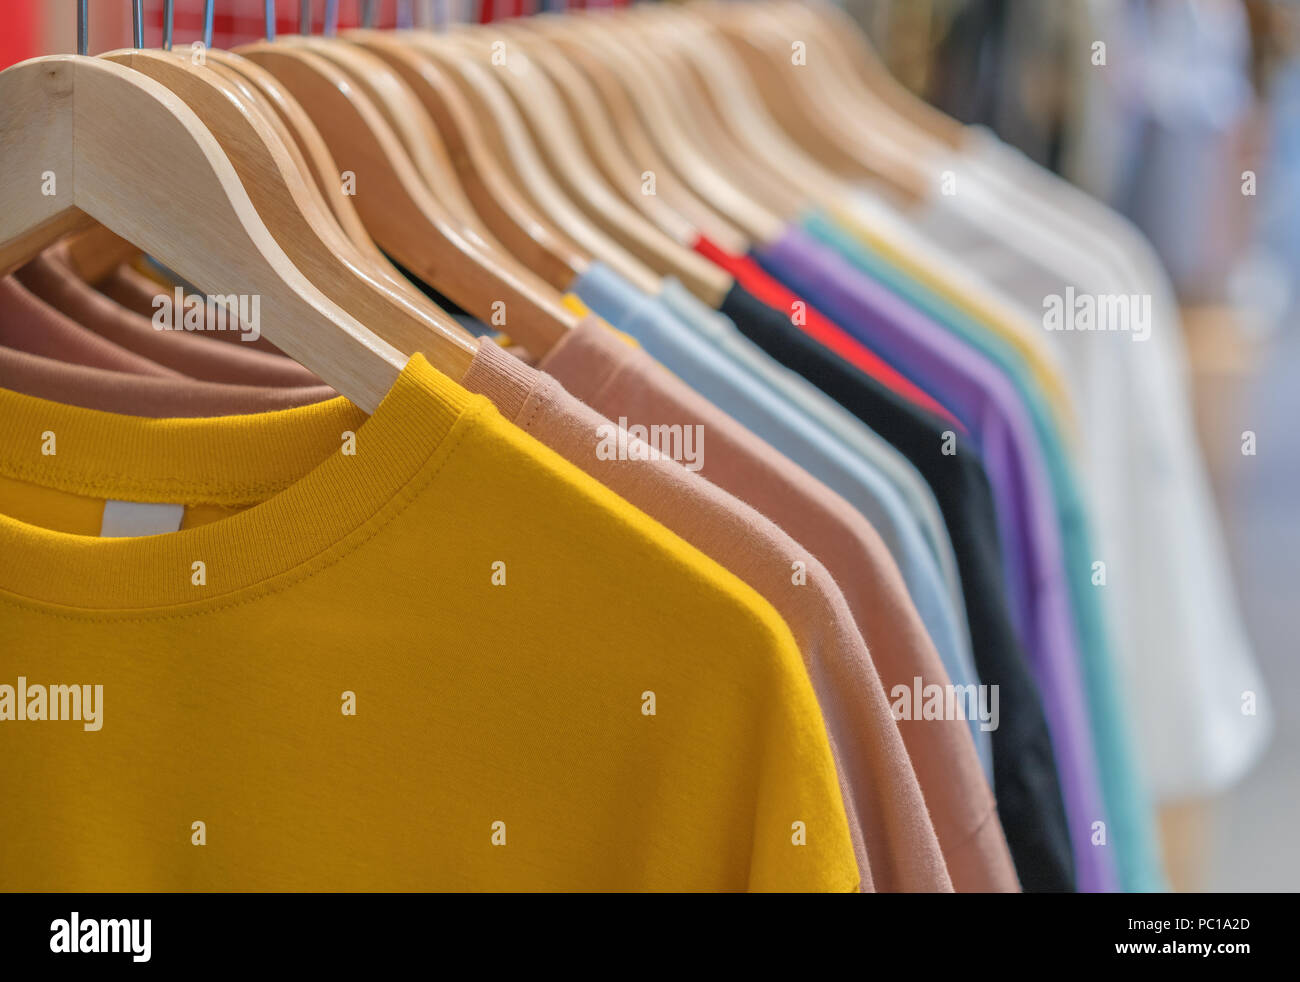 womens clothes on hangers in store Stock Photo